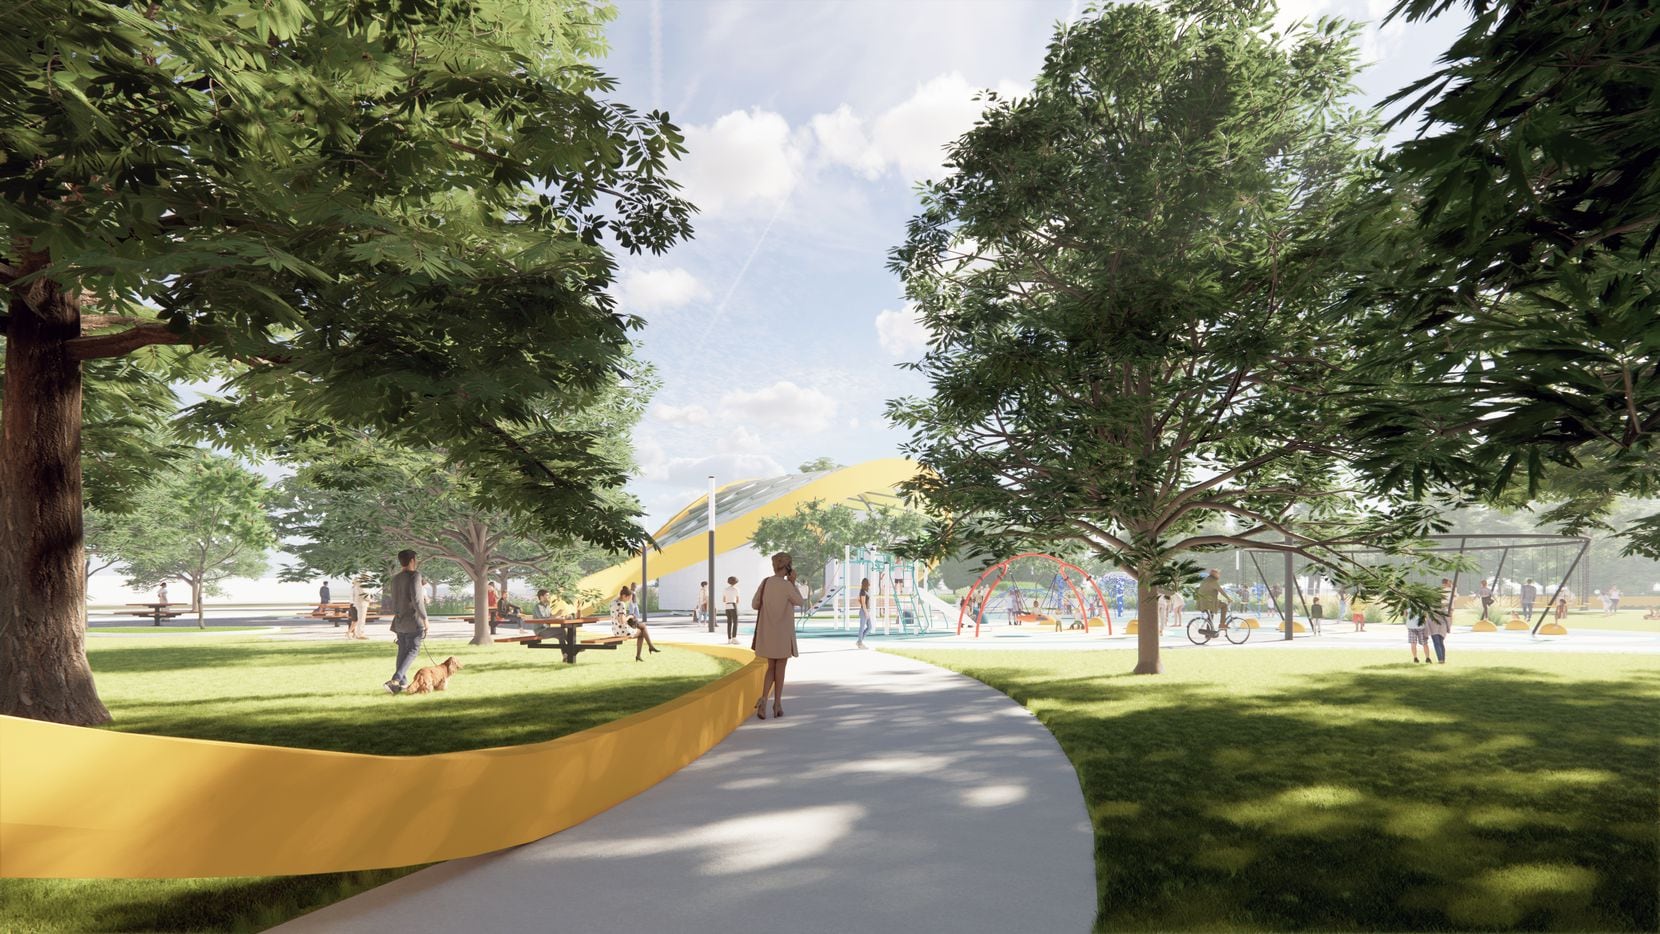 This HKS rendering shows the "ribbon of play," a yellow steel design feature, that runs through the park and ties the various activity areas together.